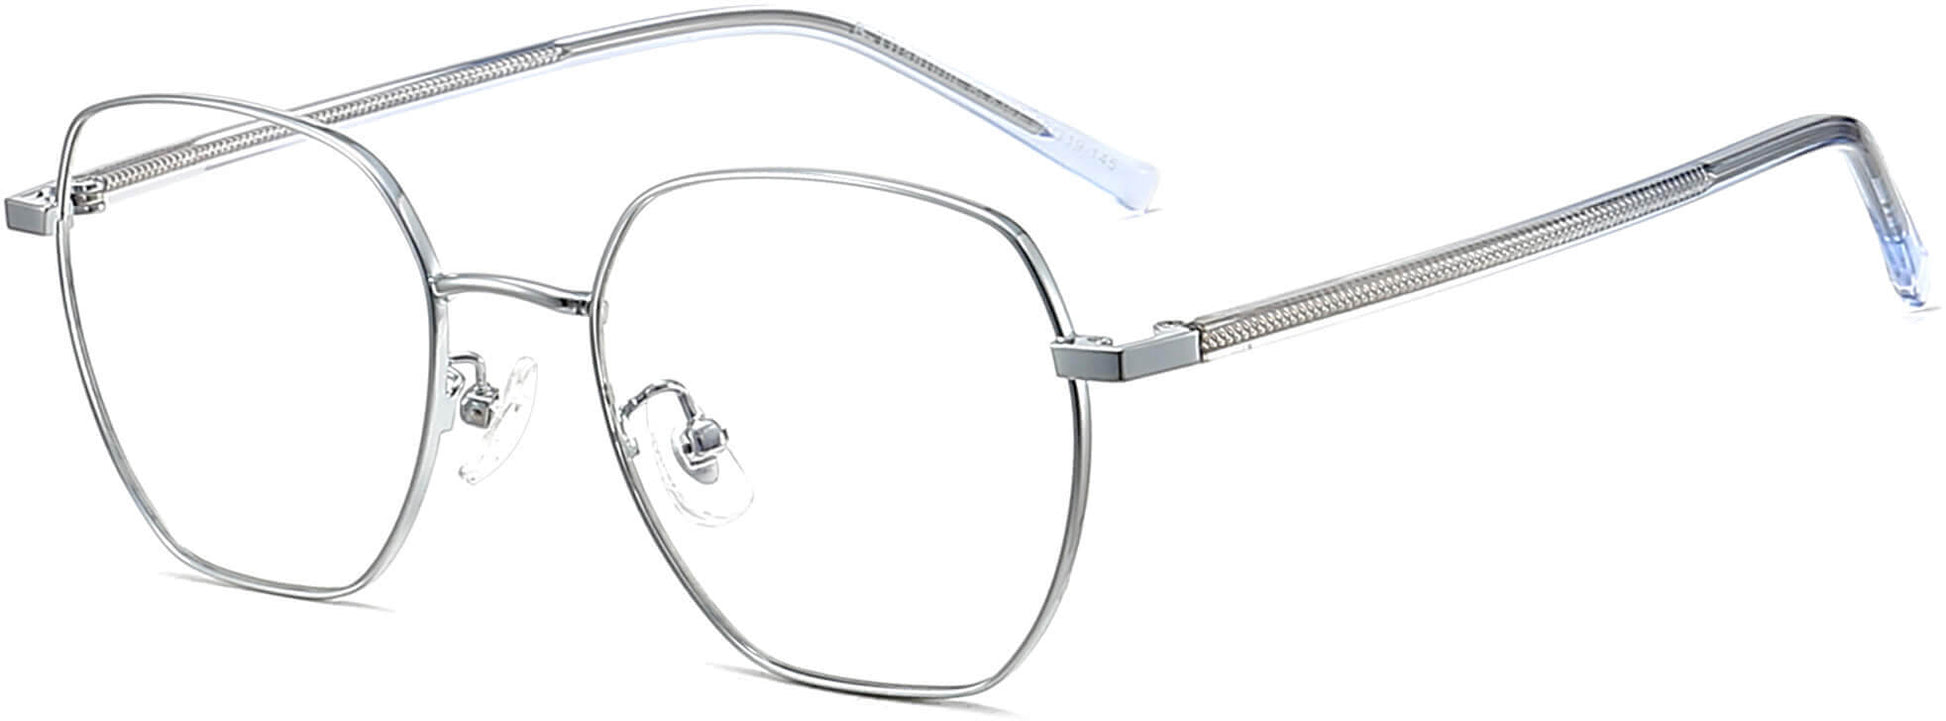 Pavone Geometric Silver Eyeglasses from ANRRI, angle view